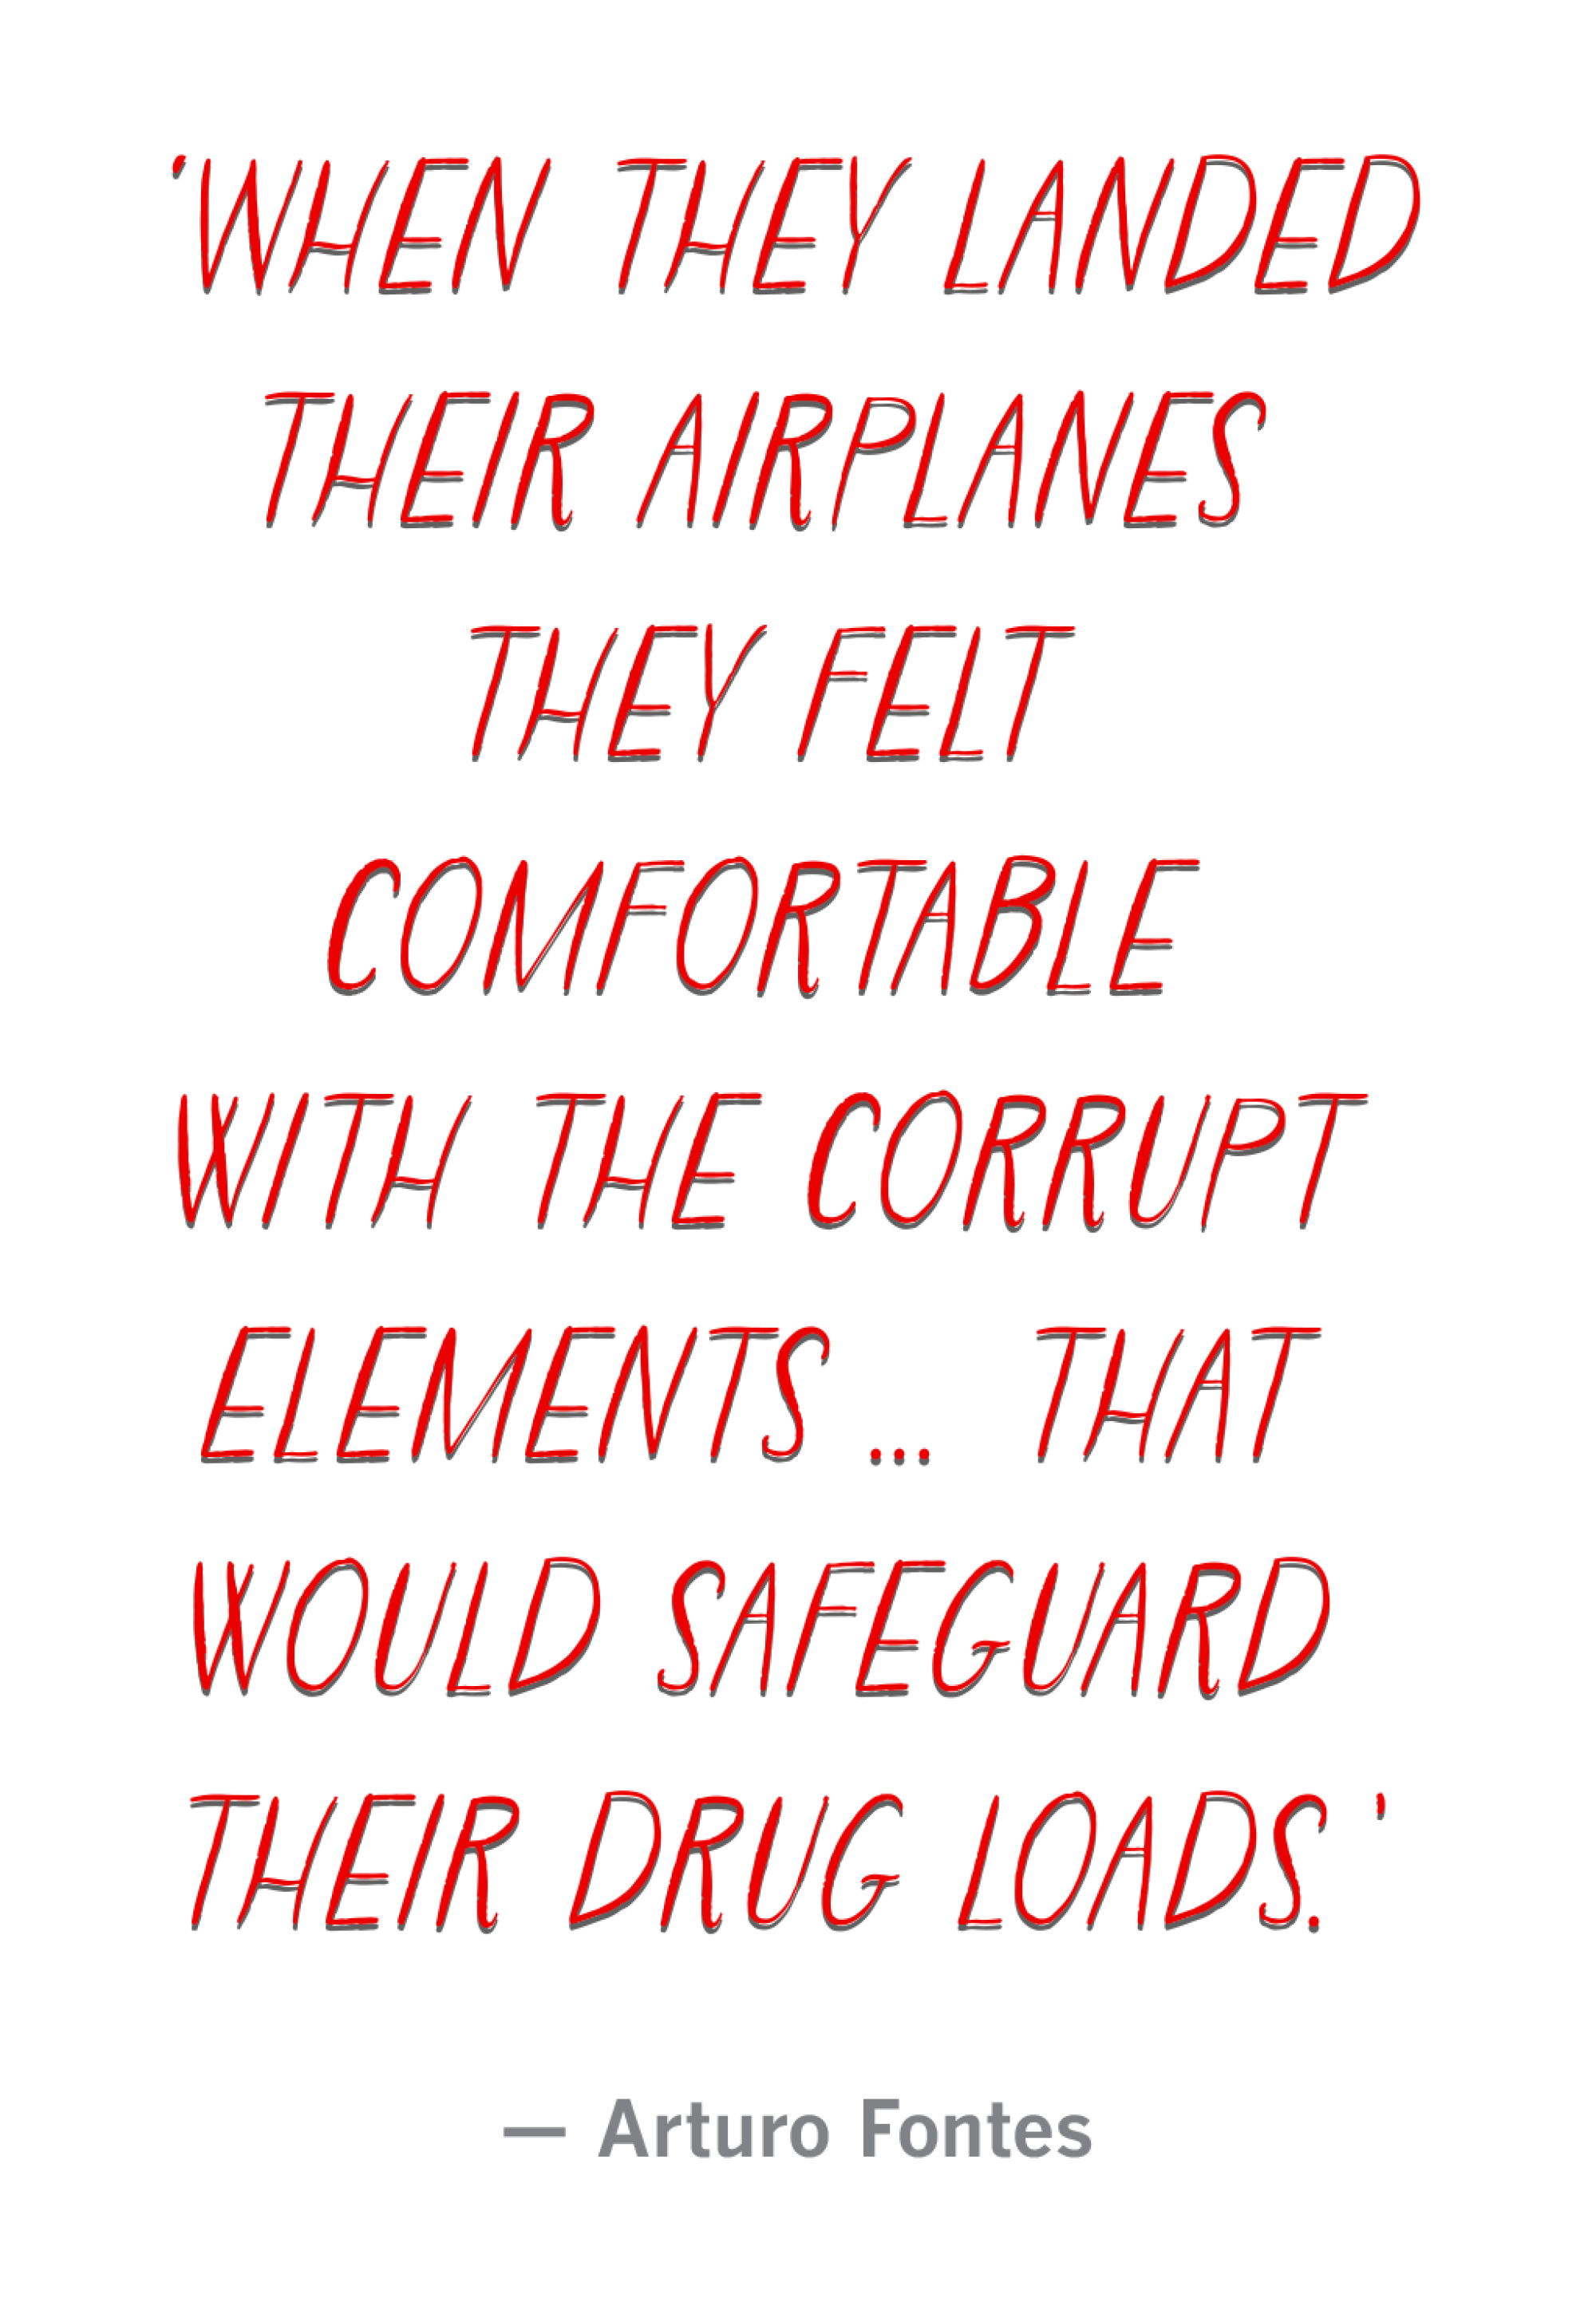 "When they landedtheir airplanes they felt comfortable with the corrupt elements ... that would safeguard their drug loads."